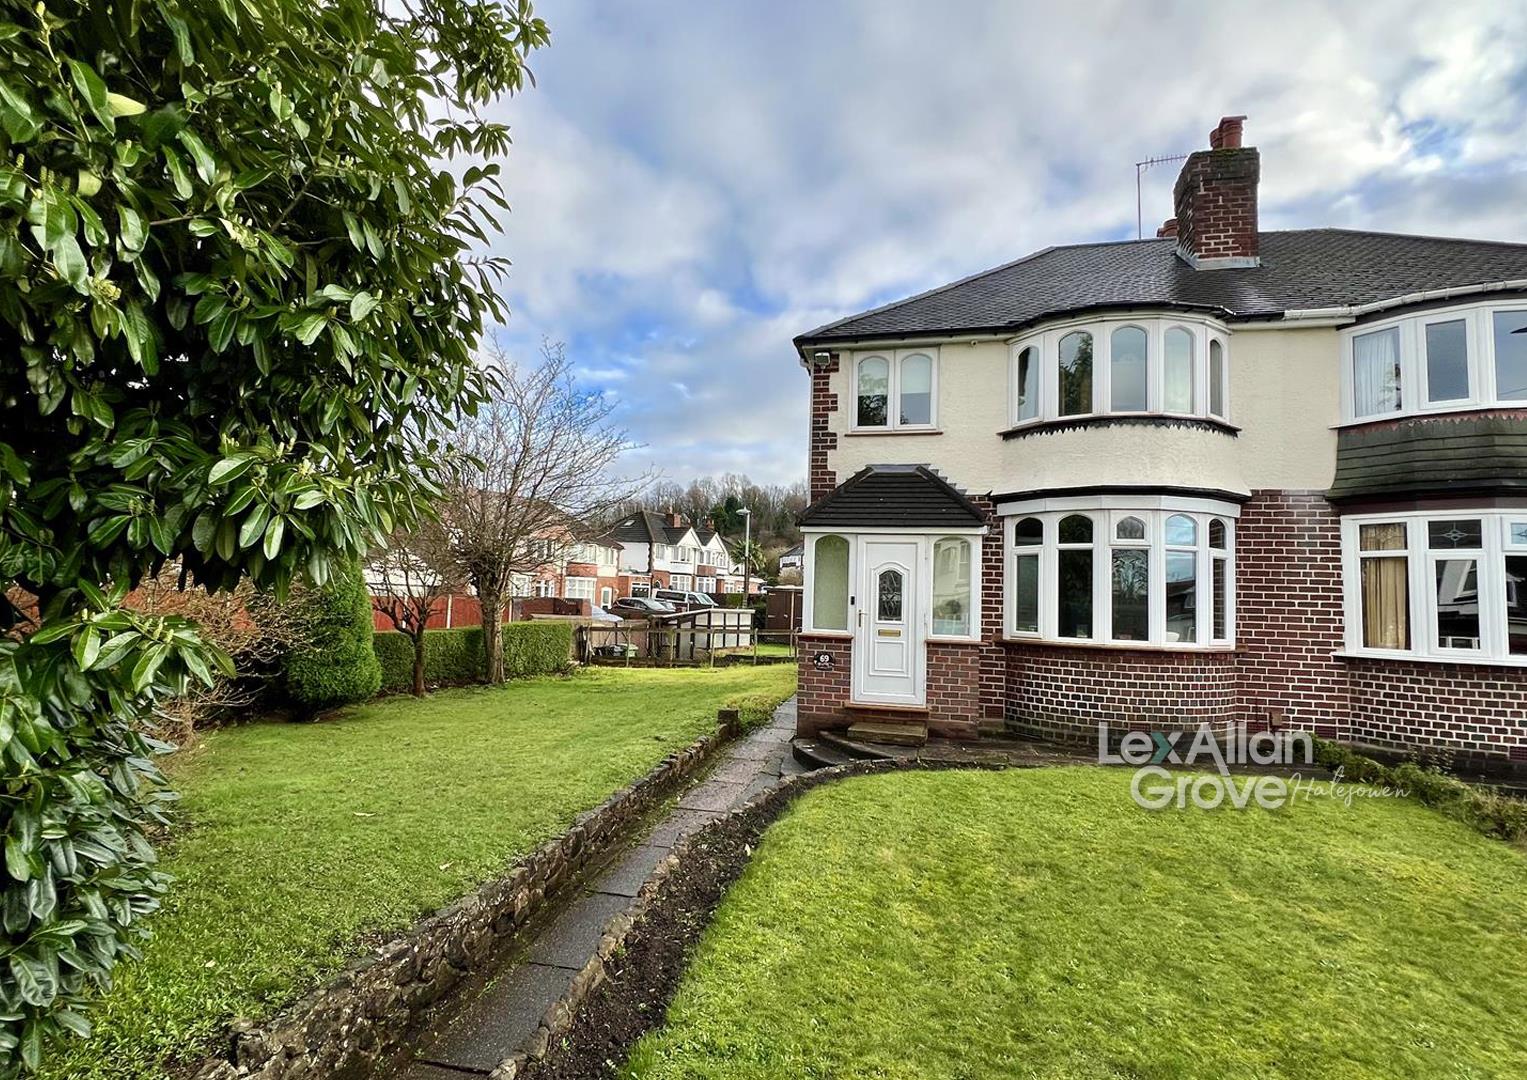 3 bed semi-detached house for sale in Lyde Green, Halesowen - Property Image 1